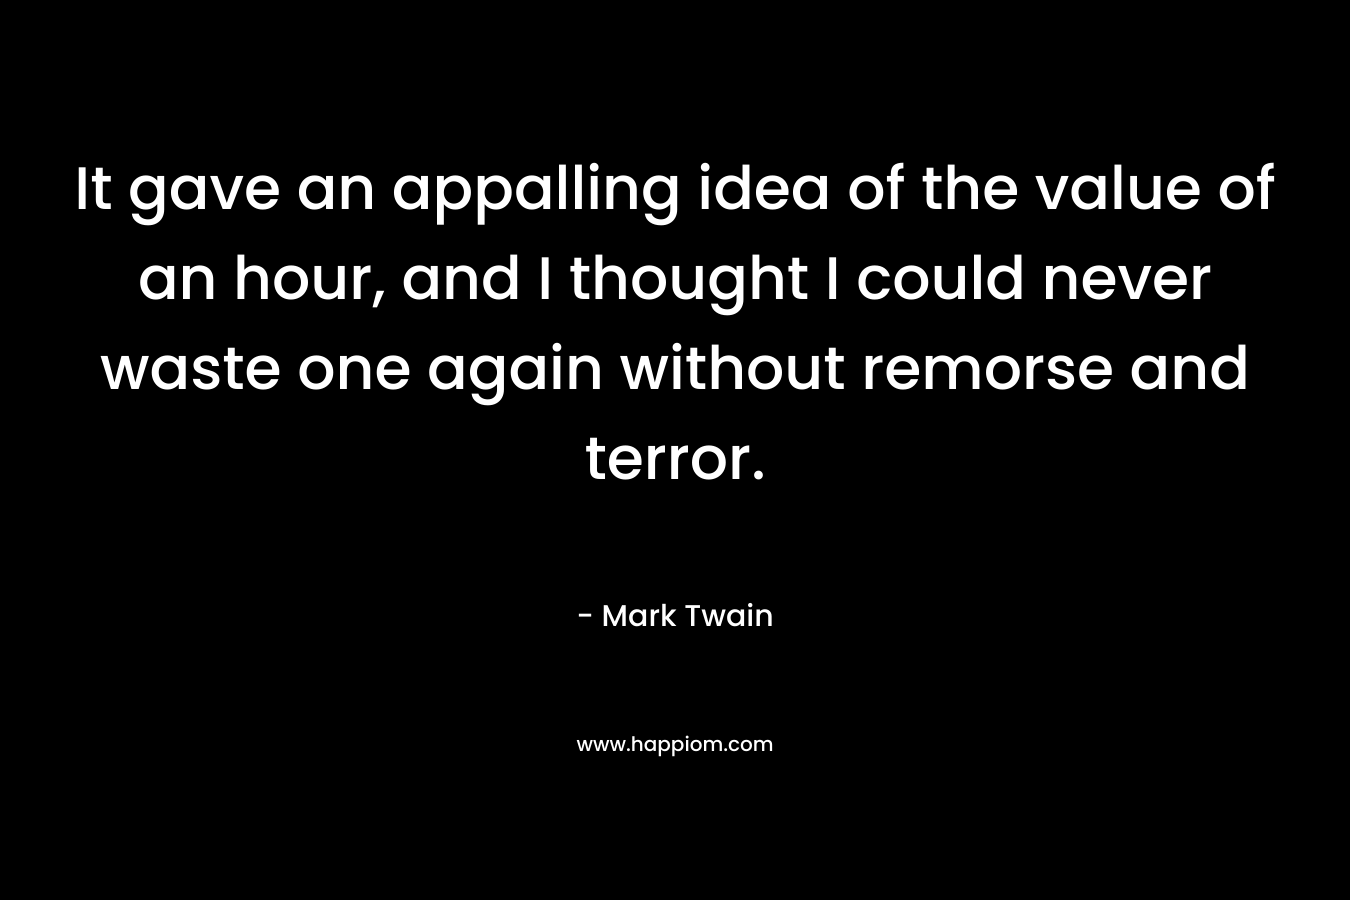 It gave an appalling idea of the value of an hour, and I thought I could never waste one again without remorse and terror. – Mark Twain